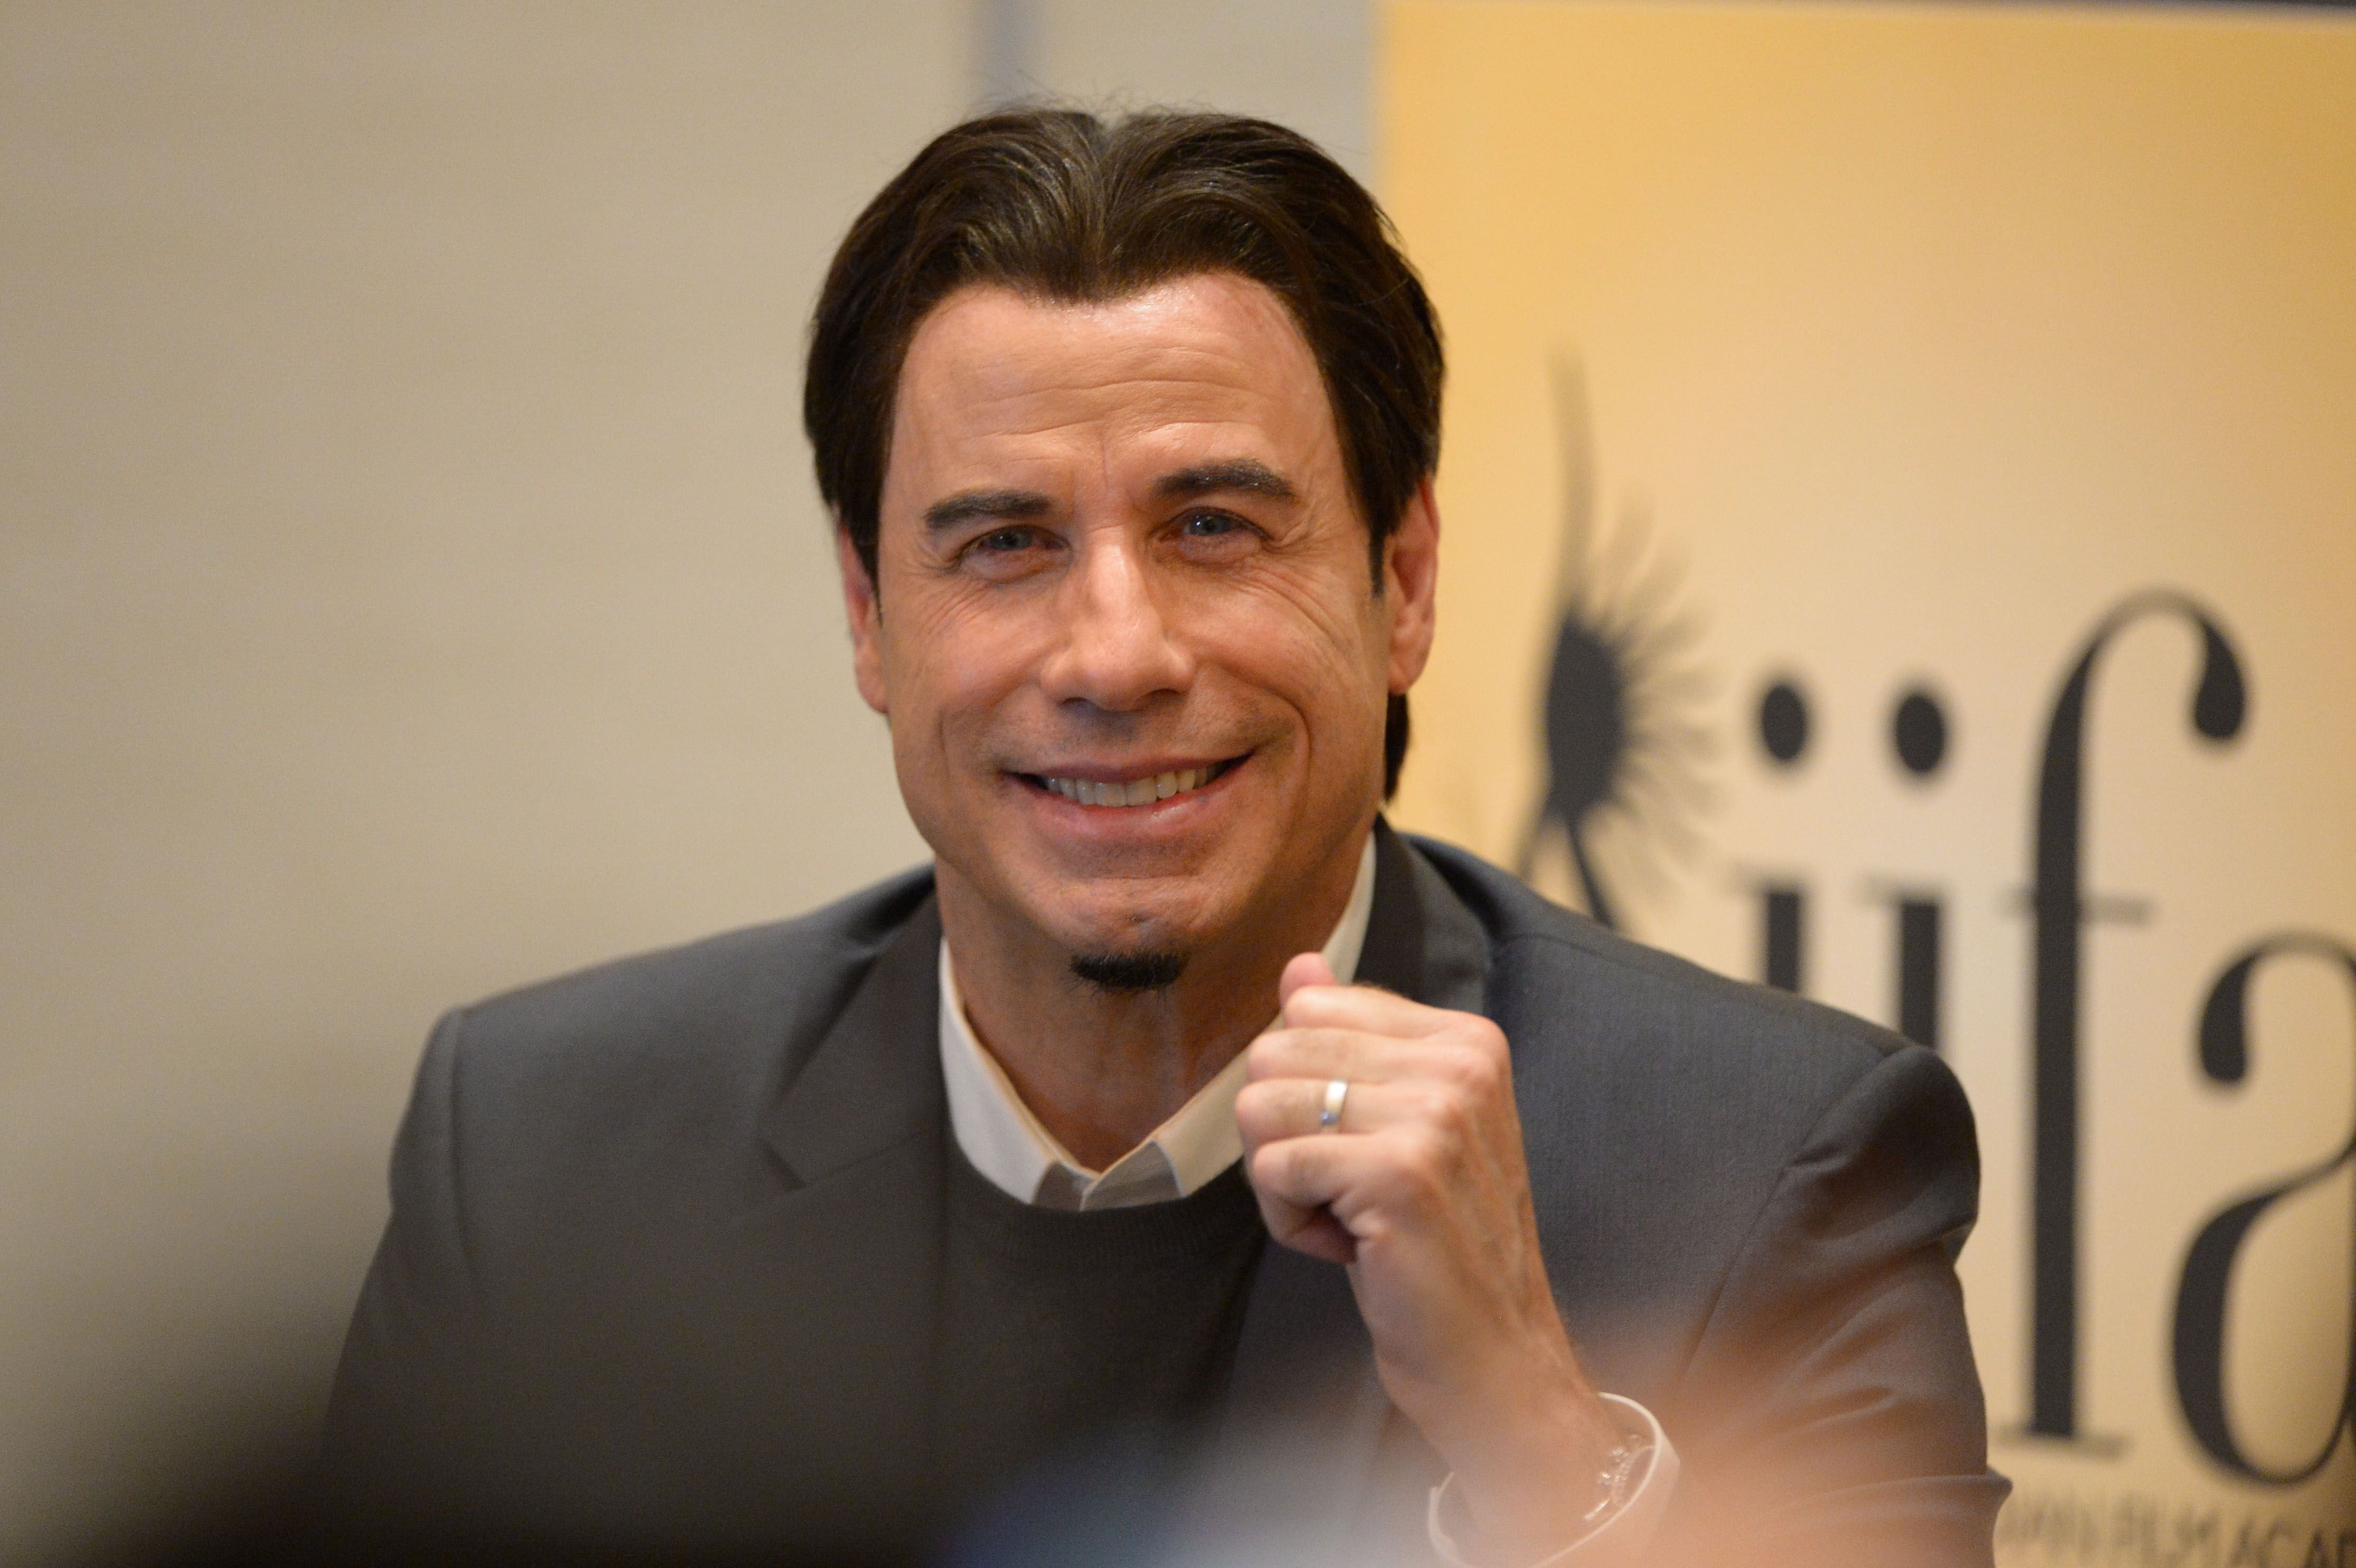 John Travolta at a press conference during the IIFA Awards week on April 26, 2014, in Tampa, Florida | Photo: Gustavo Caballero/Getty Images